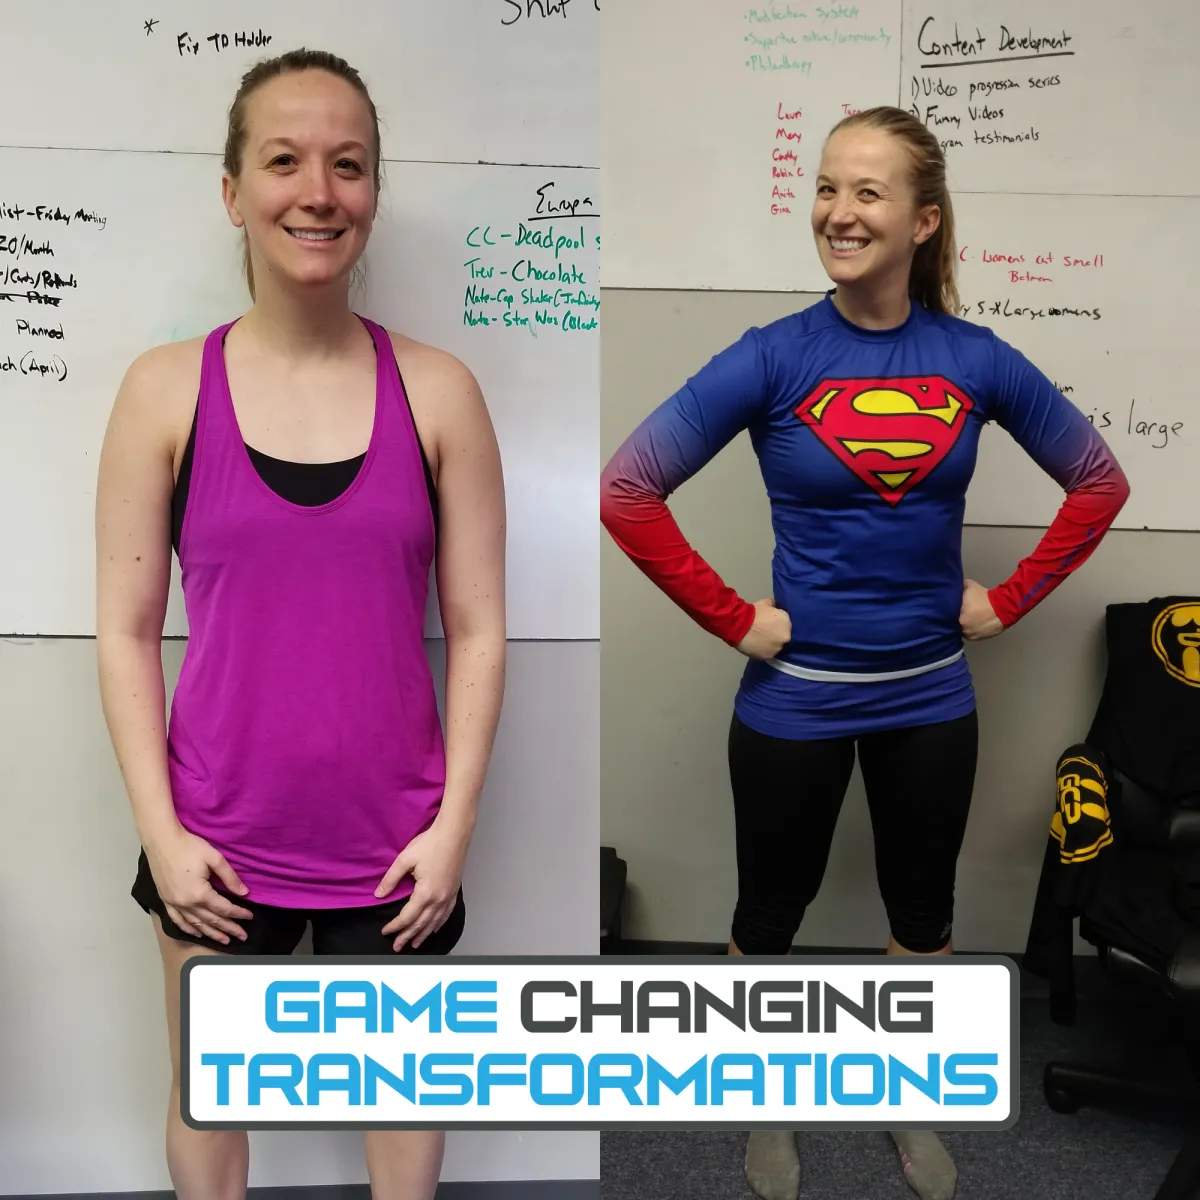 Another amazing weight loss transformation in Vernon Hills IL